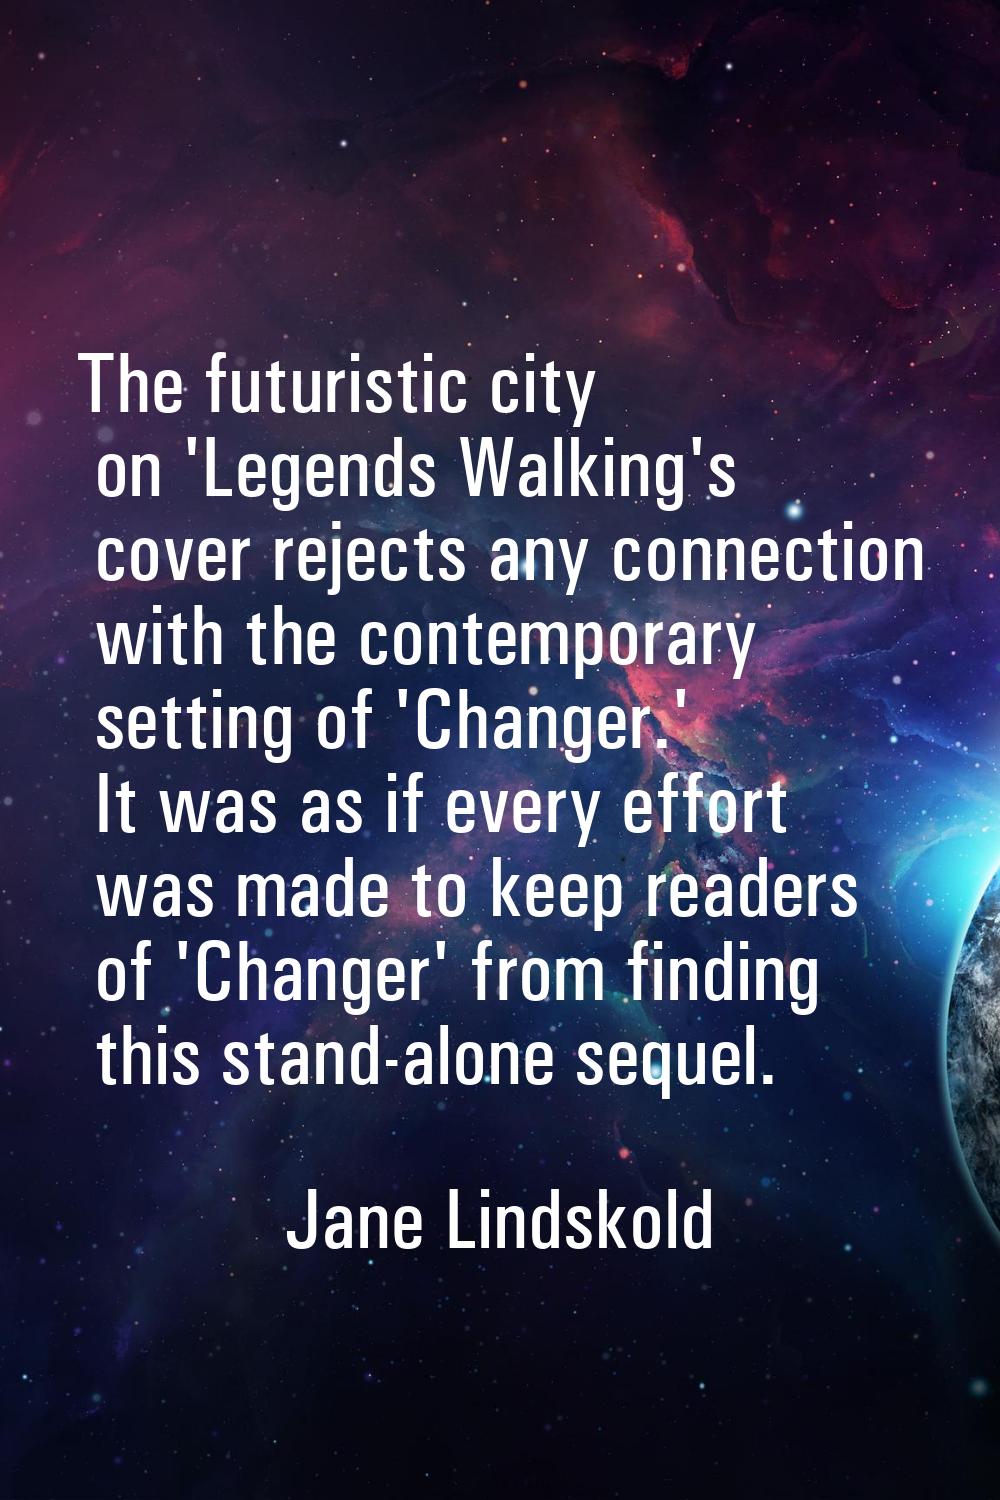 The futuristic city on 'Legends Walking's cover rejects any connection with the contemporary settin